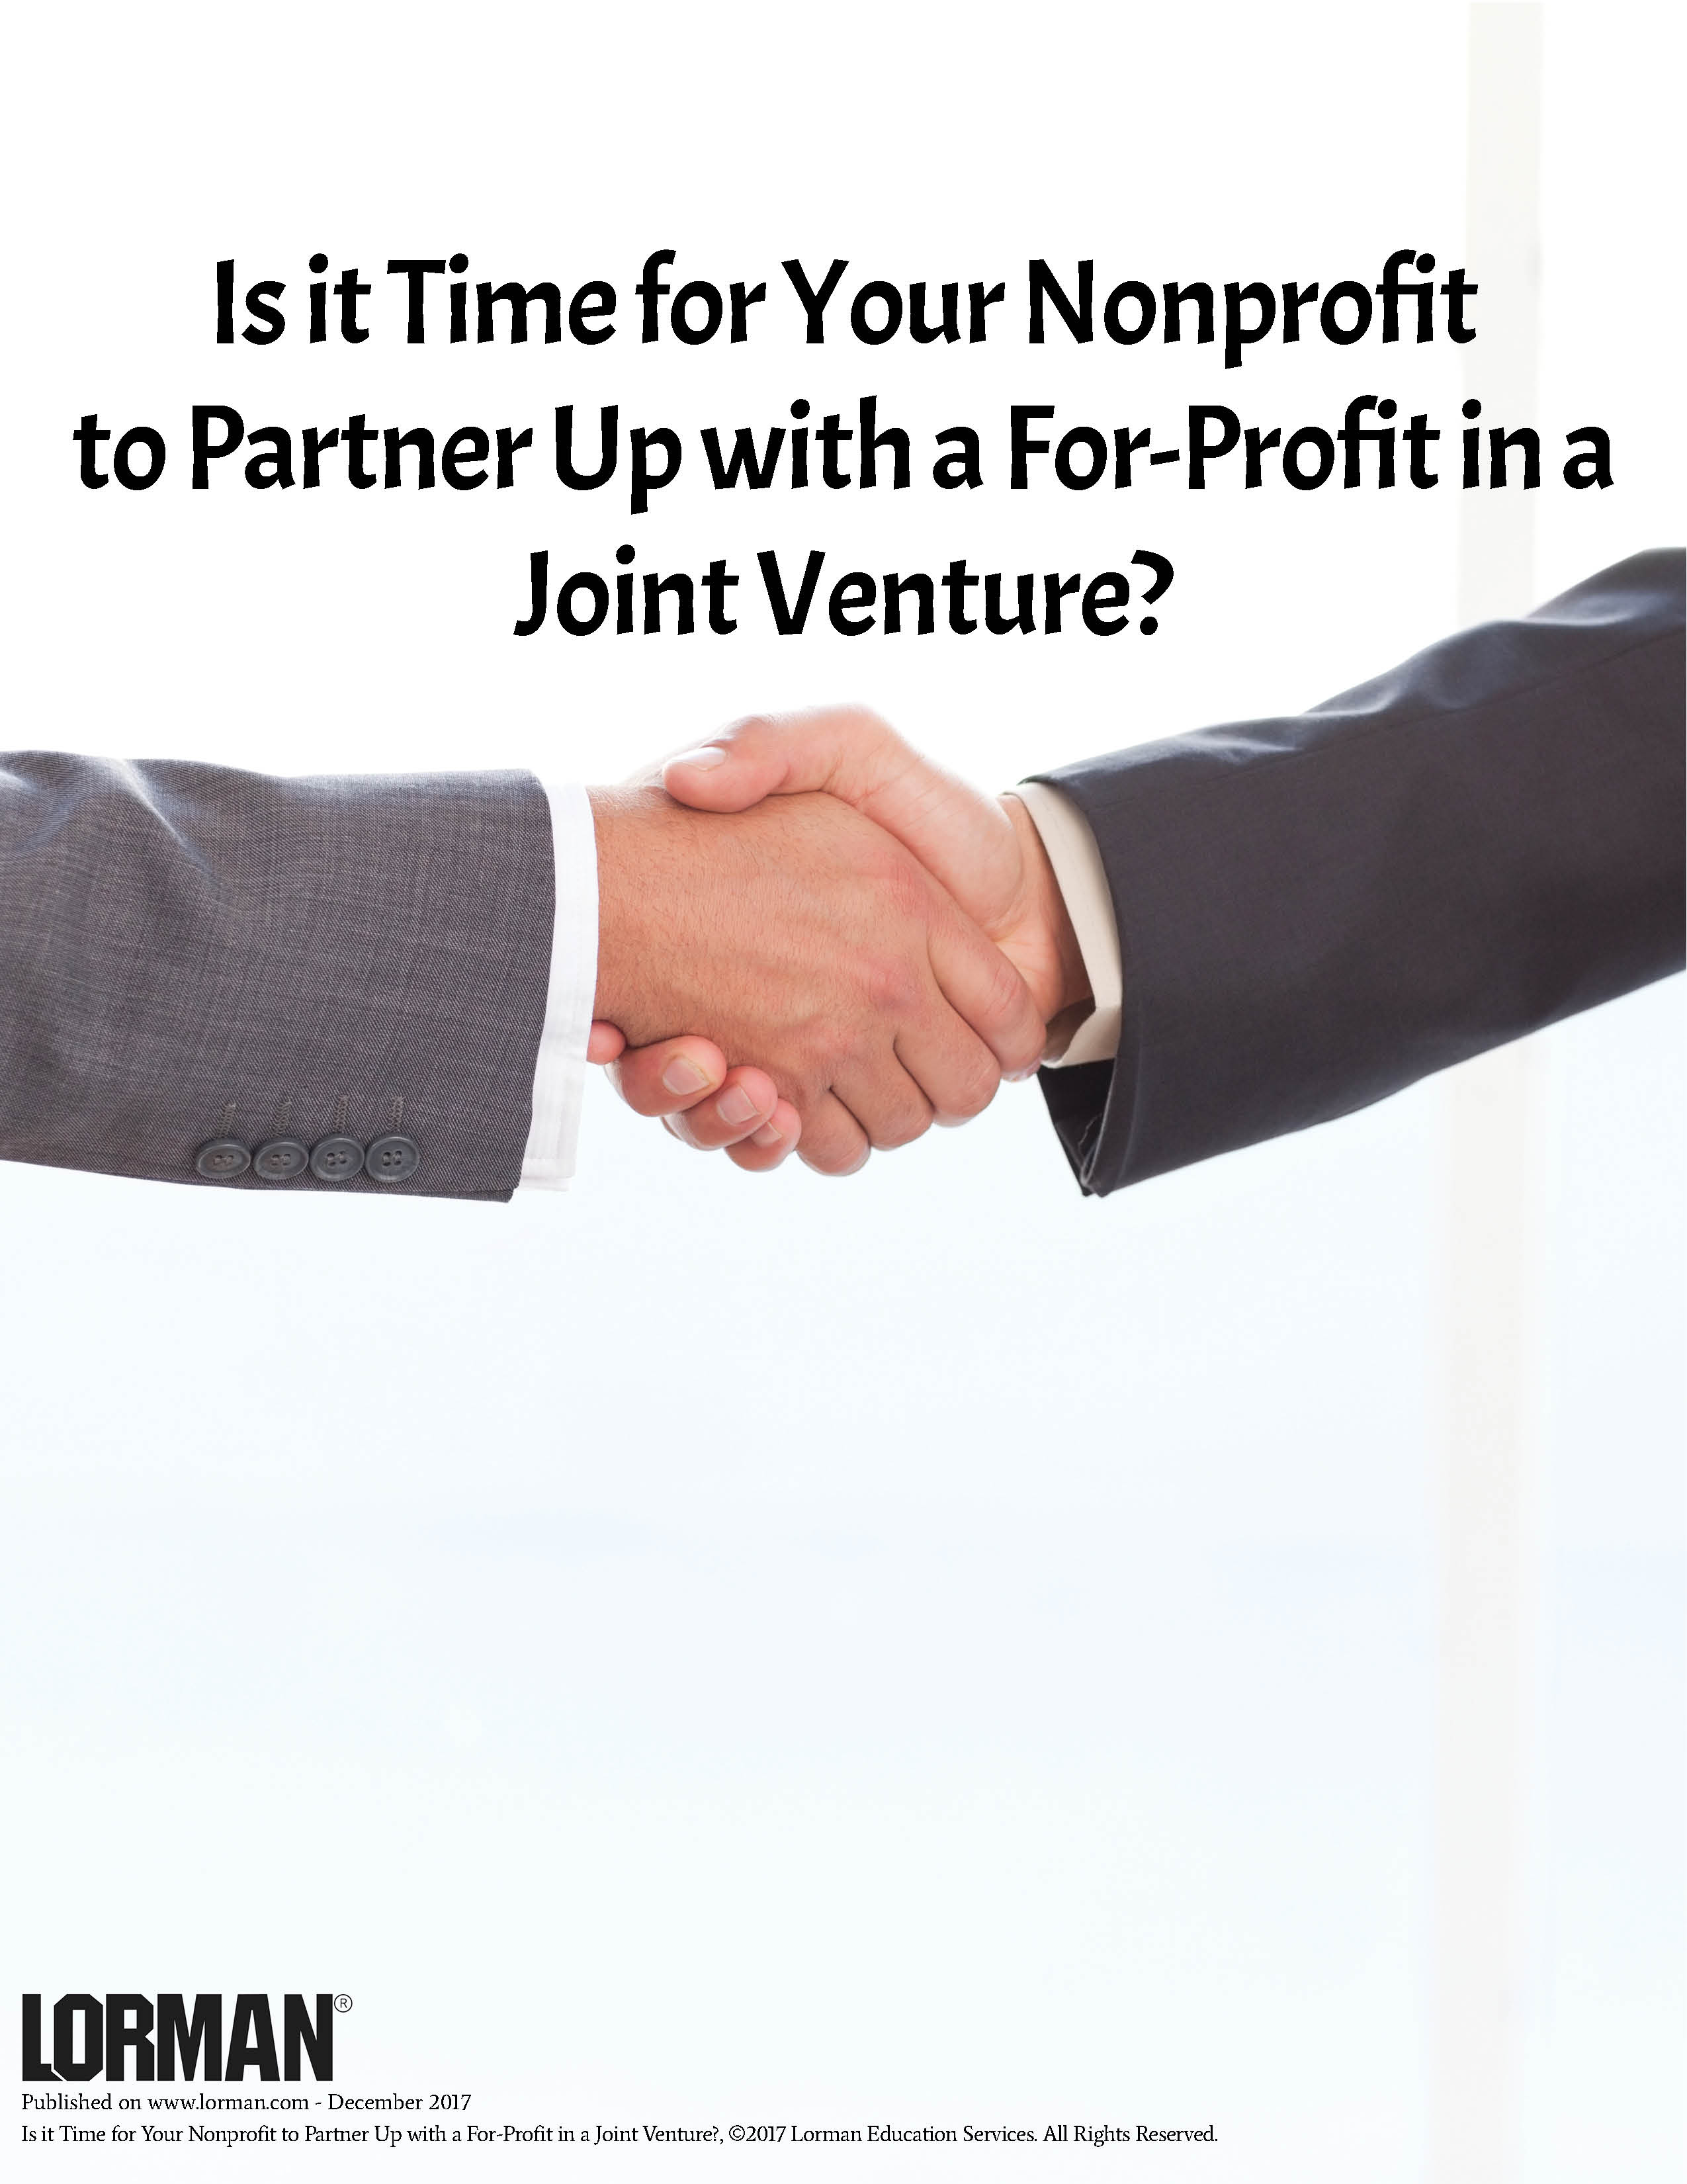 Is it Time for Your Nonprofit to Partner Up with a For-Profit in a Joint Venture?